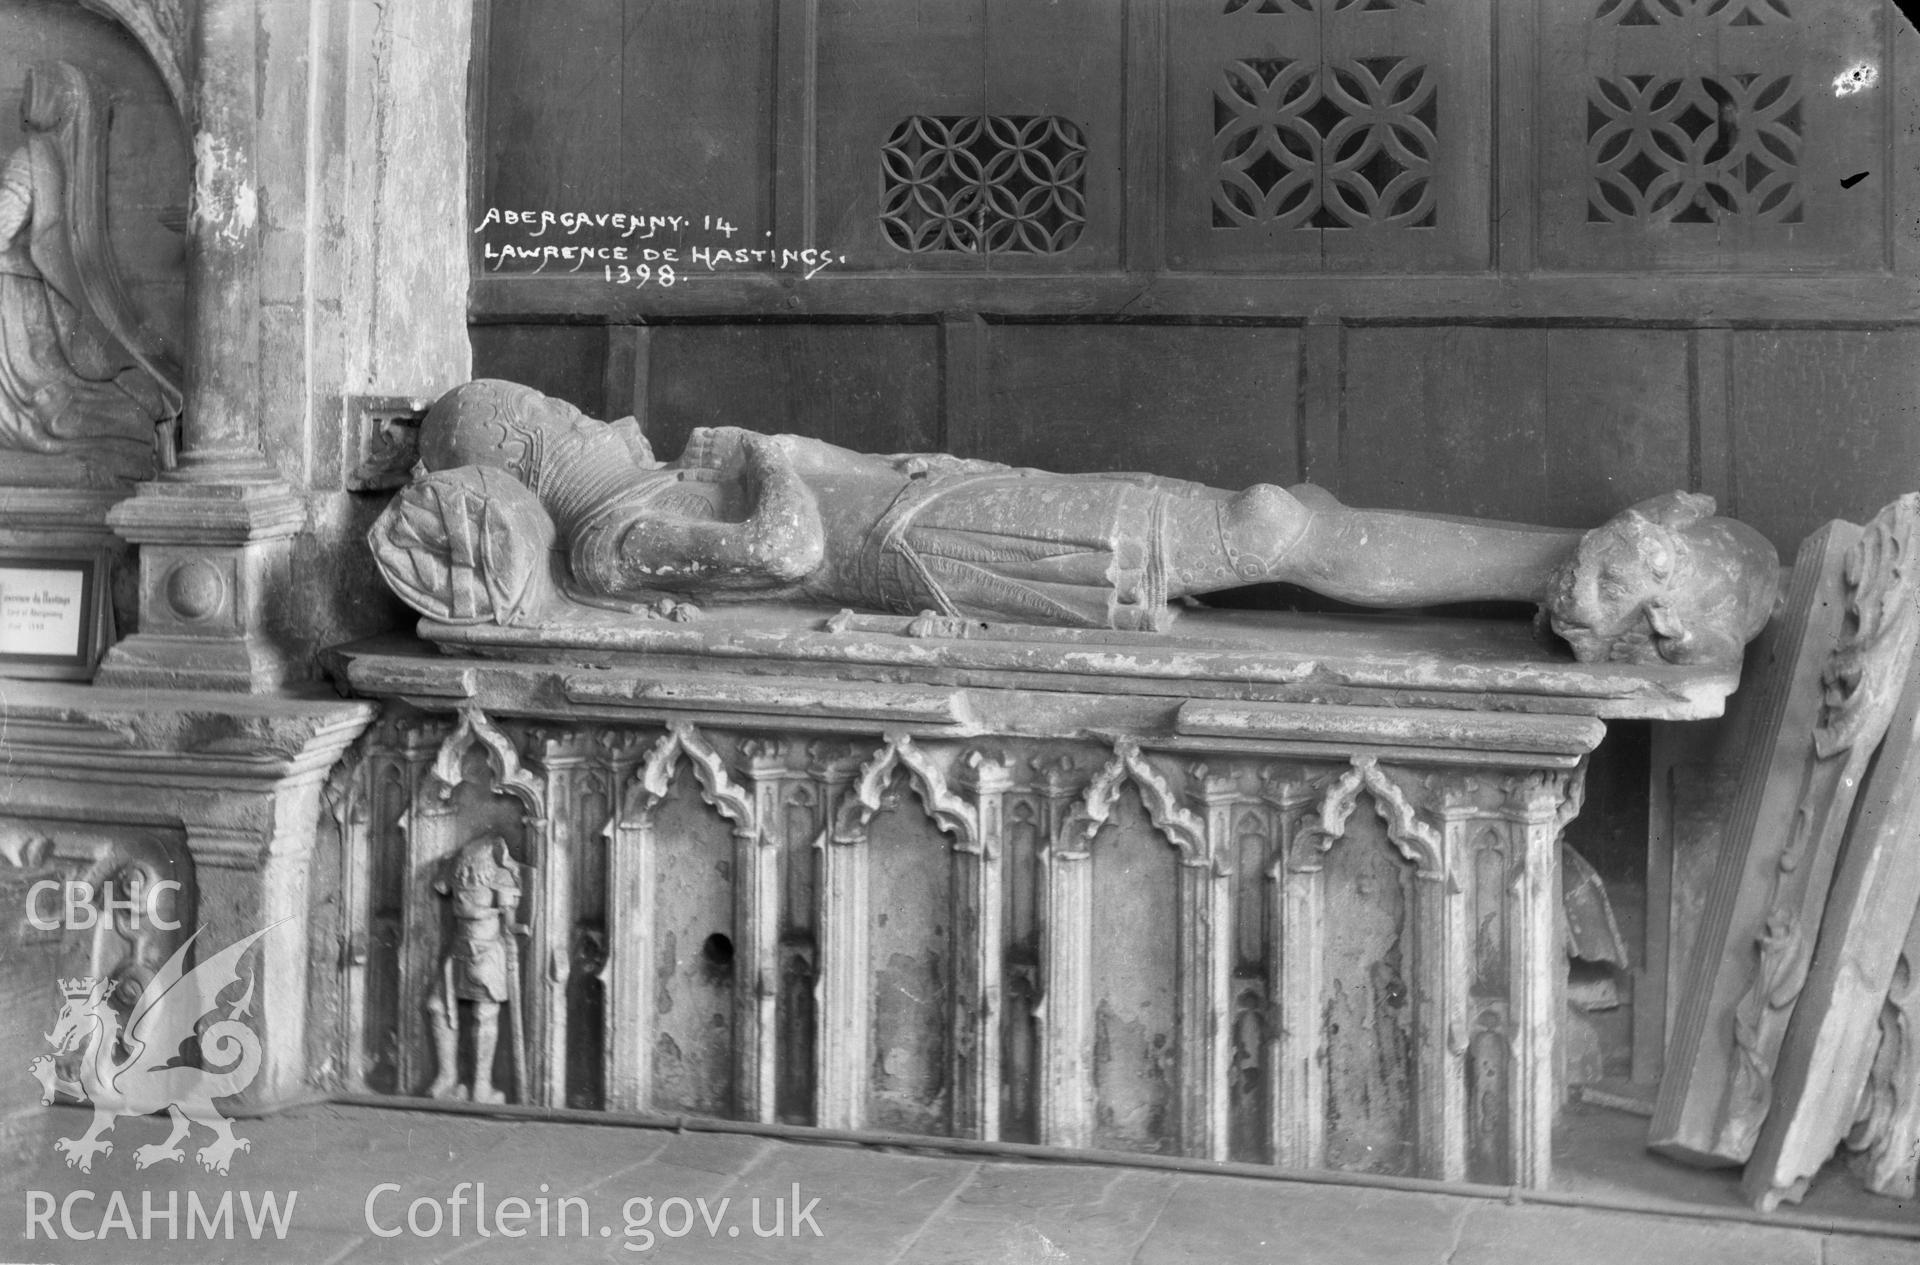 Interior view of St Mary's Church Abergavenny showing the effigy of Lawrence de Hastings died 1398, taken by W A Call.